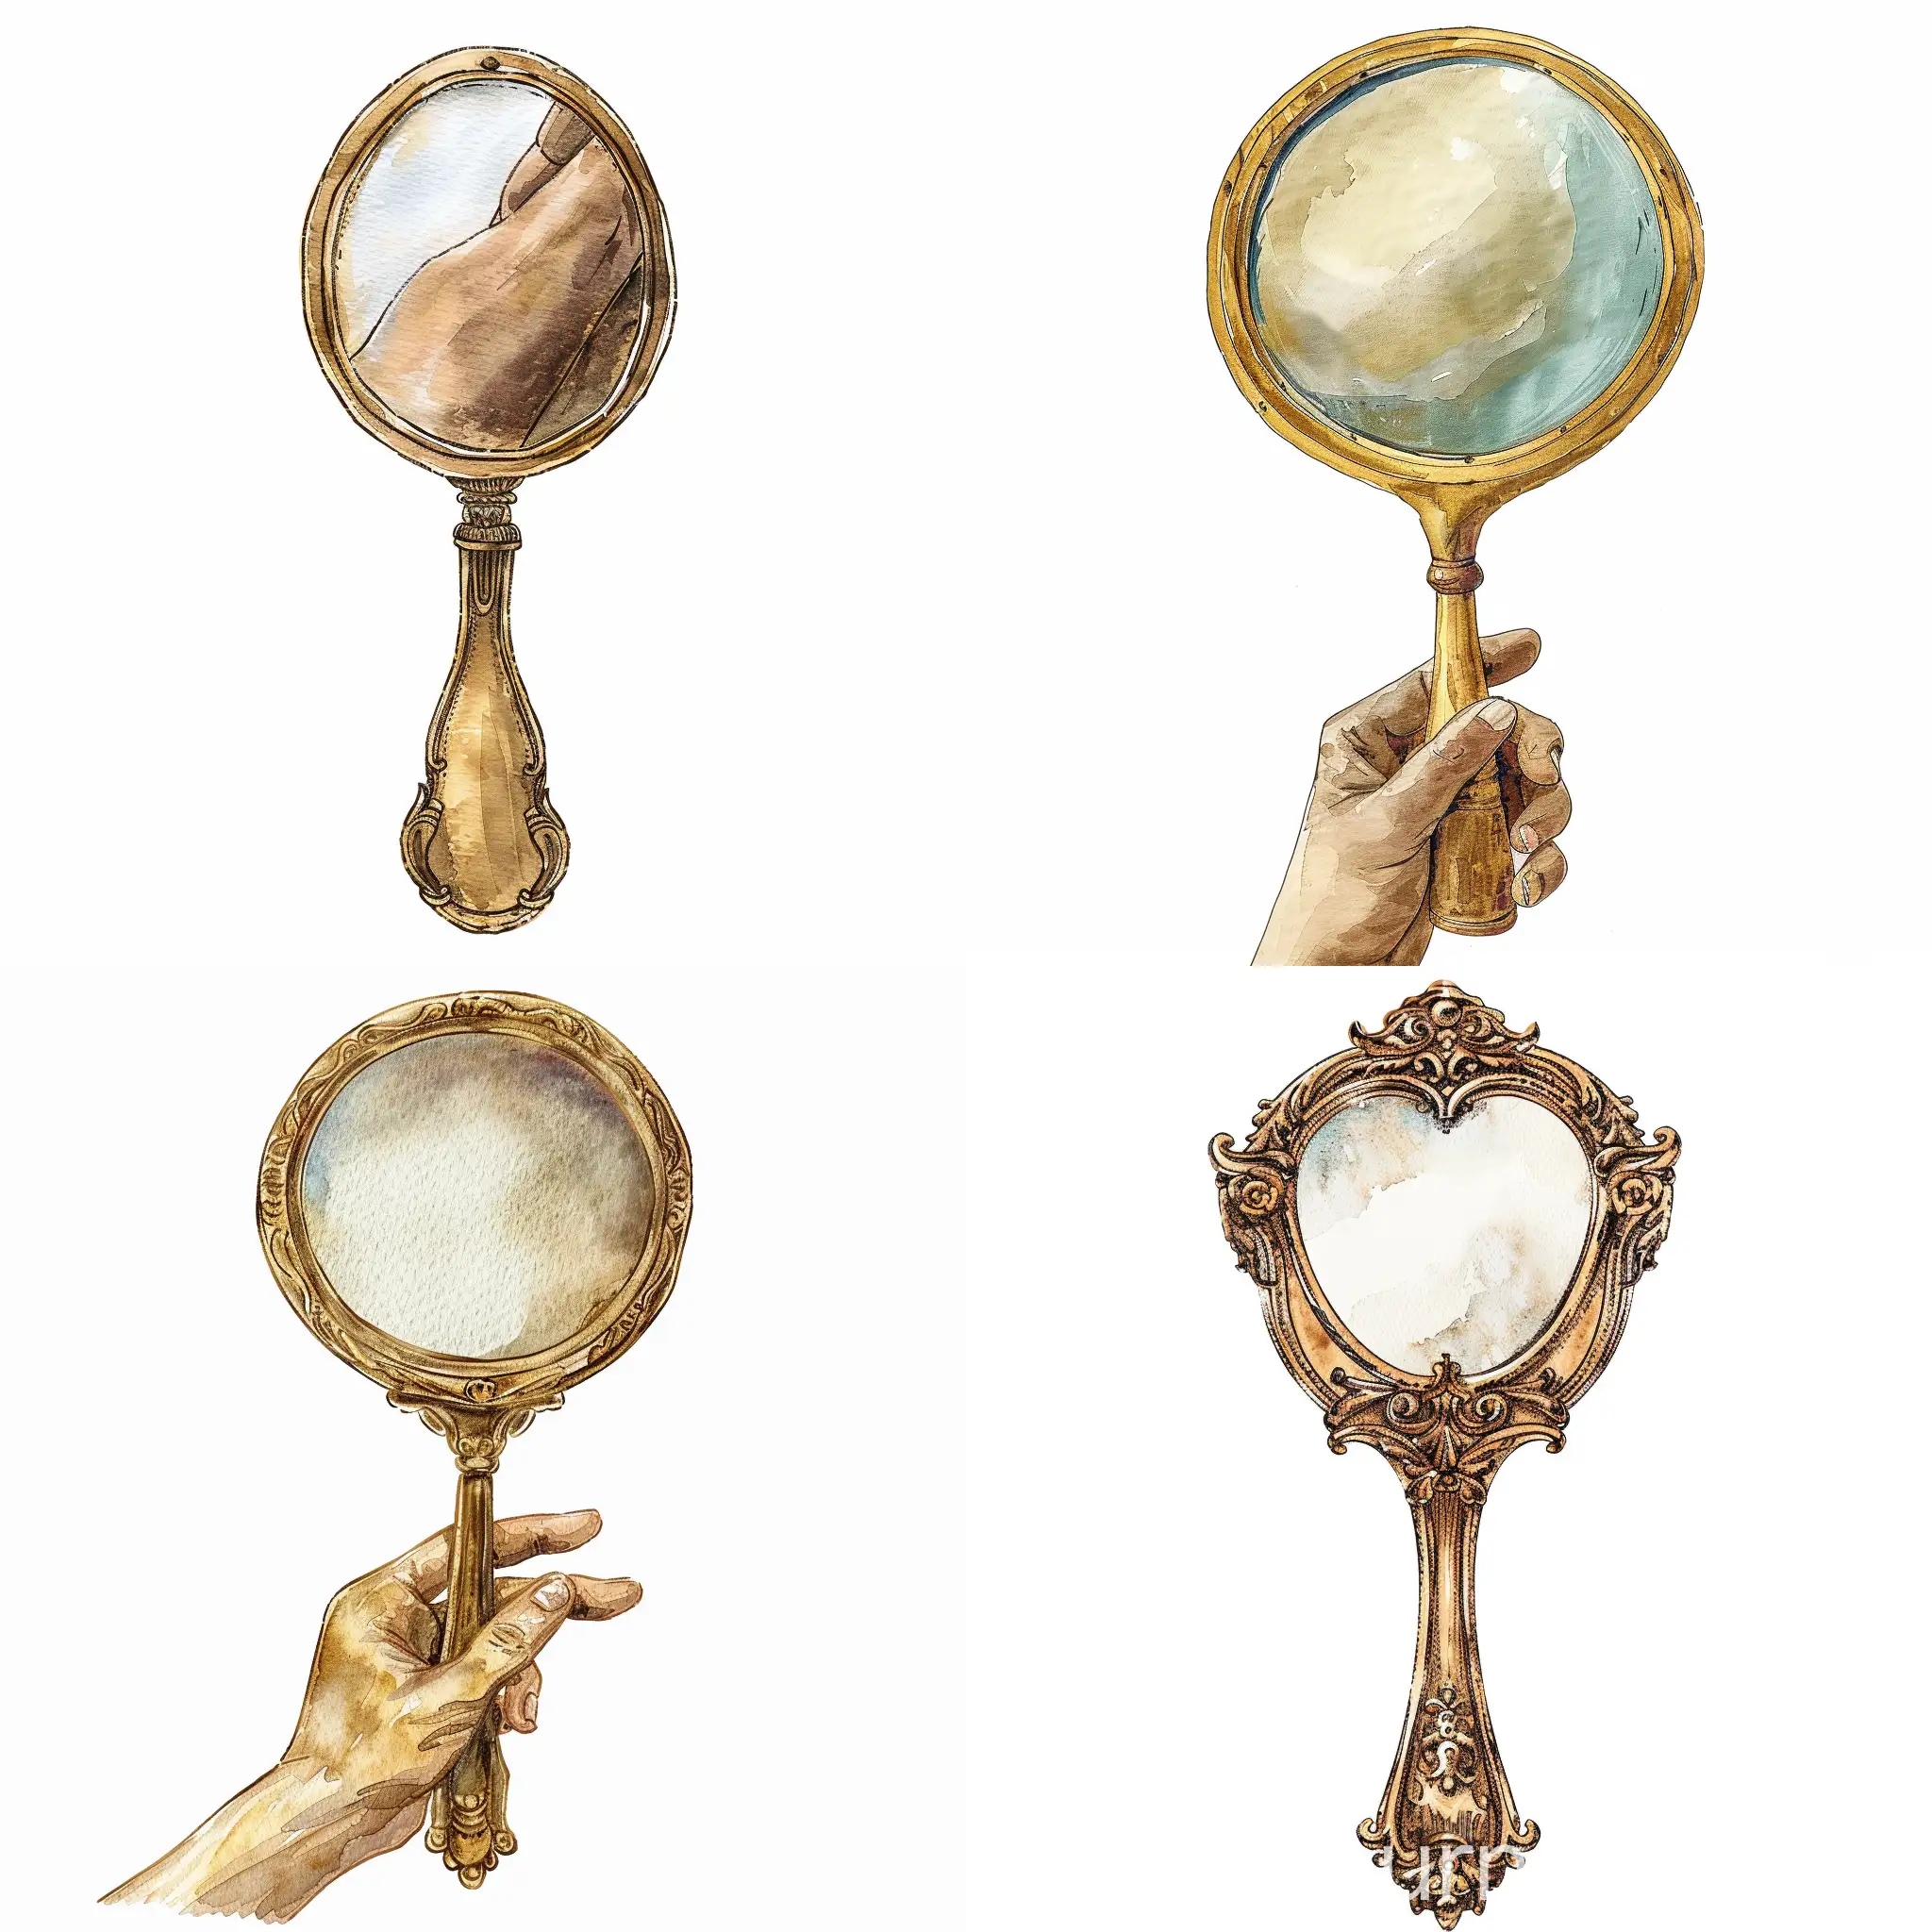 Vintage-Gold-Hand-Mirror-in-Watercolor-Style-on-White-Background